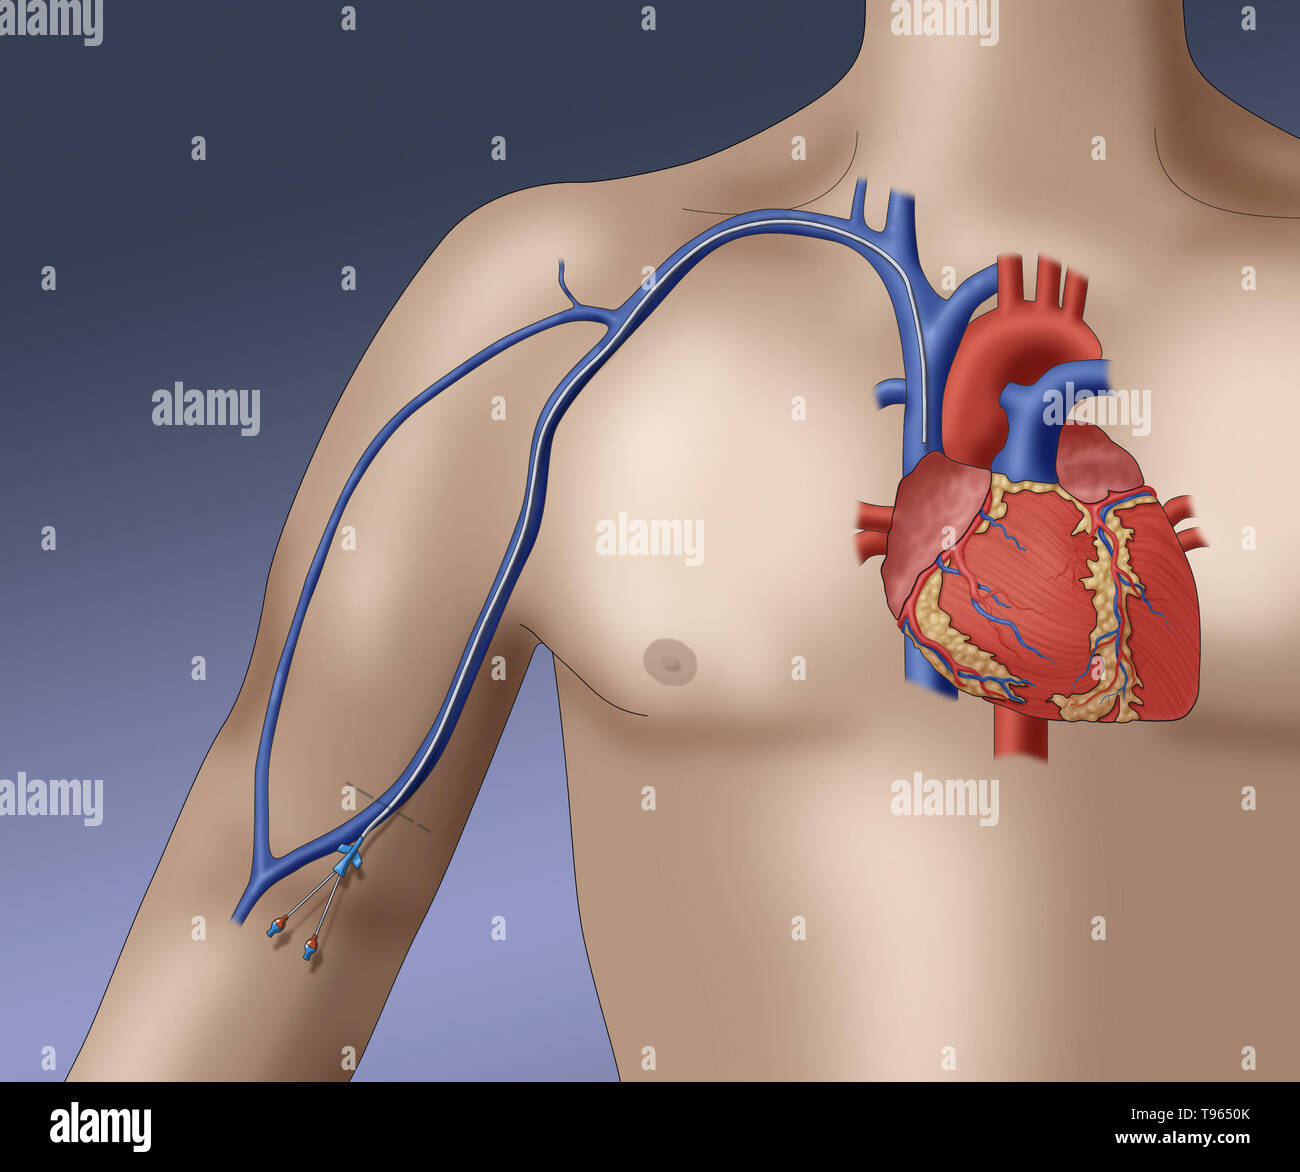 Illustration depicting a PICC (peripherally inserted central catheter), a form of intravenous access that can be used for a prolonged period of time (as in chemotherapy regimens, for example). Stock Photo